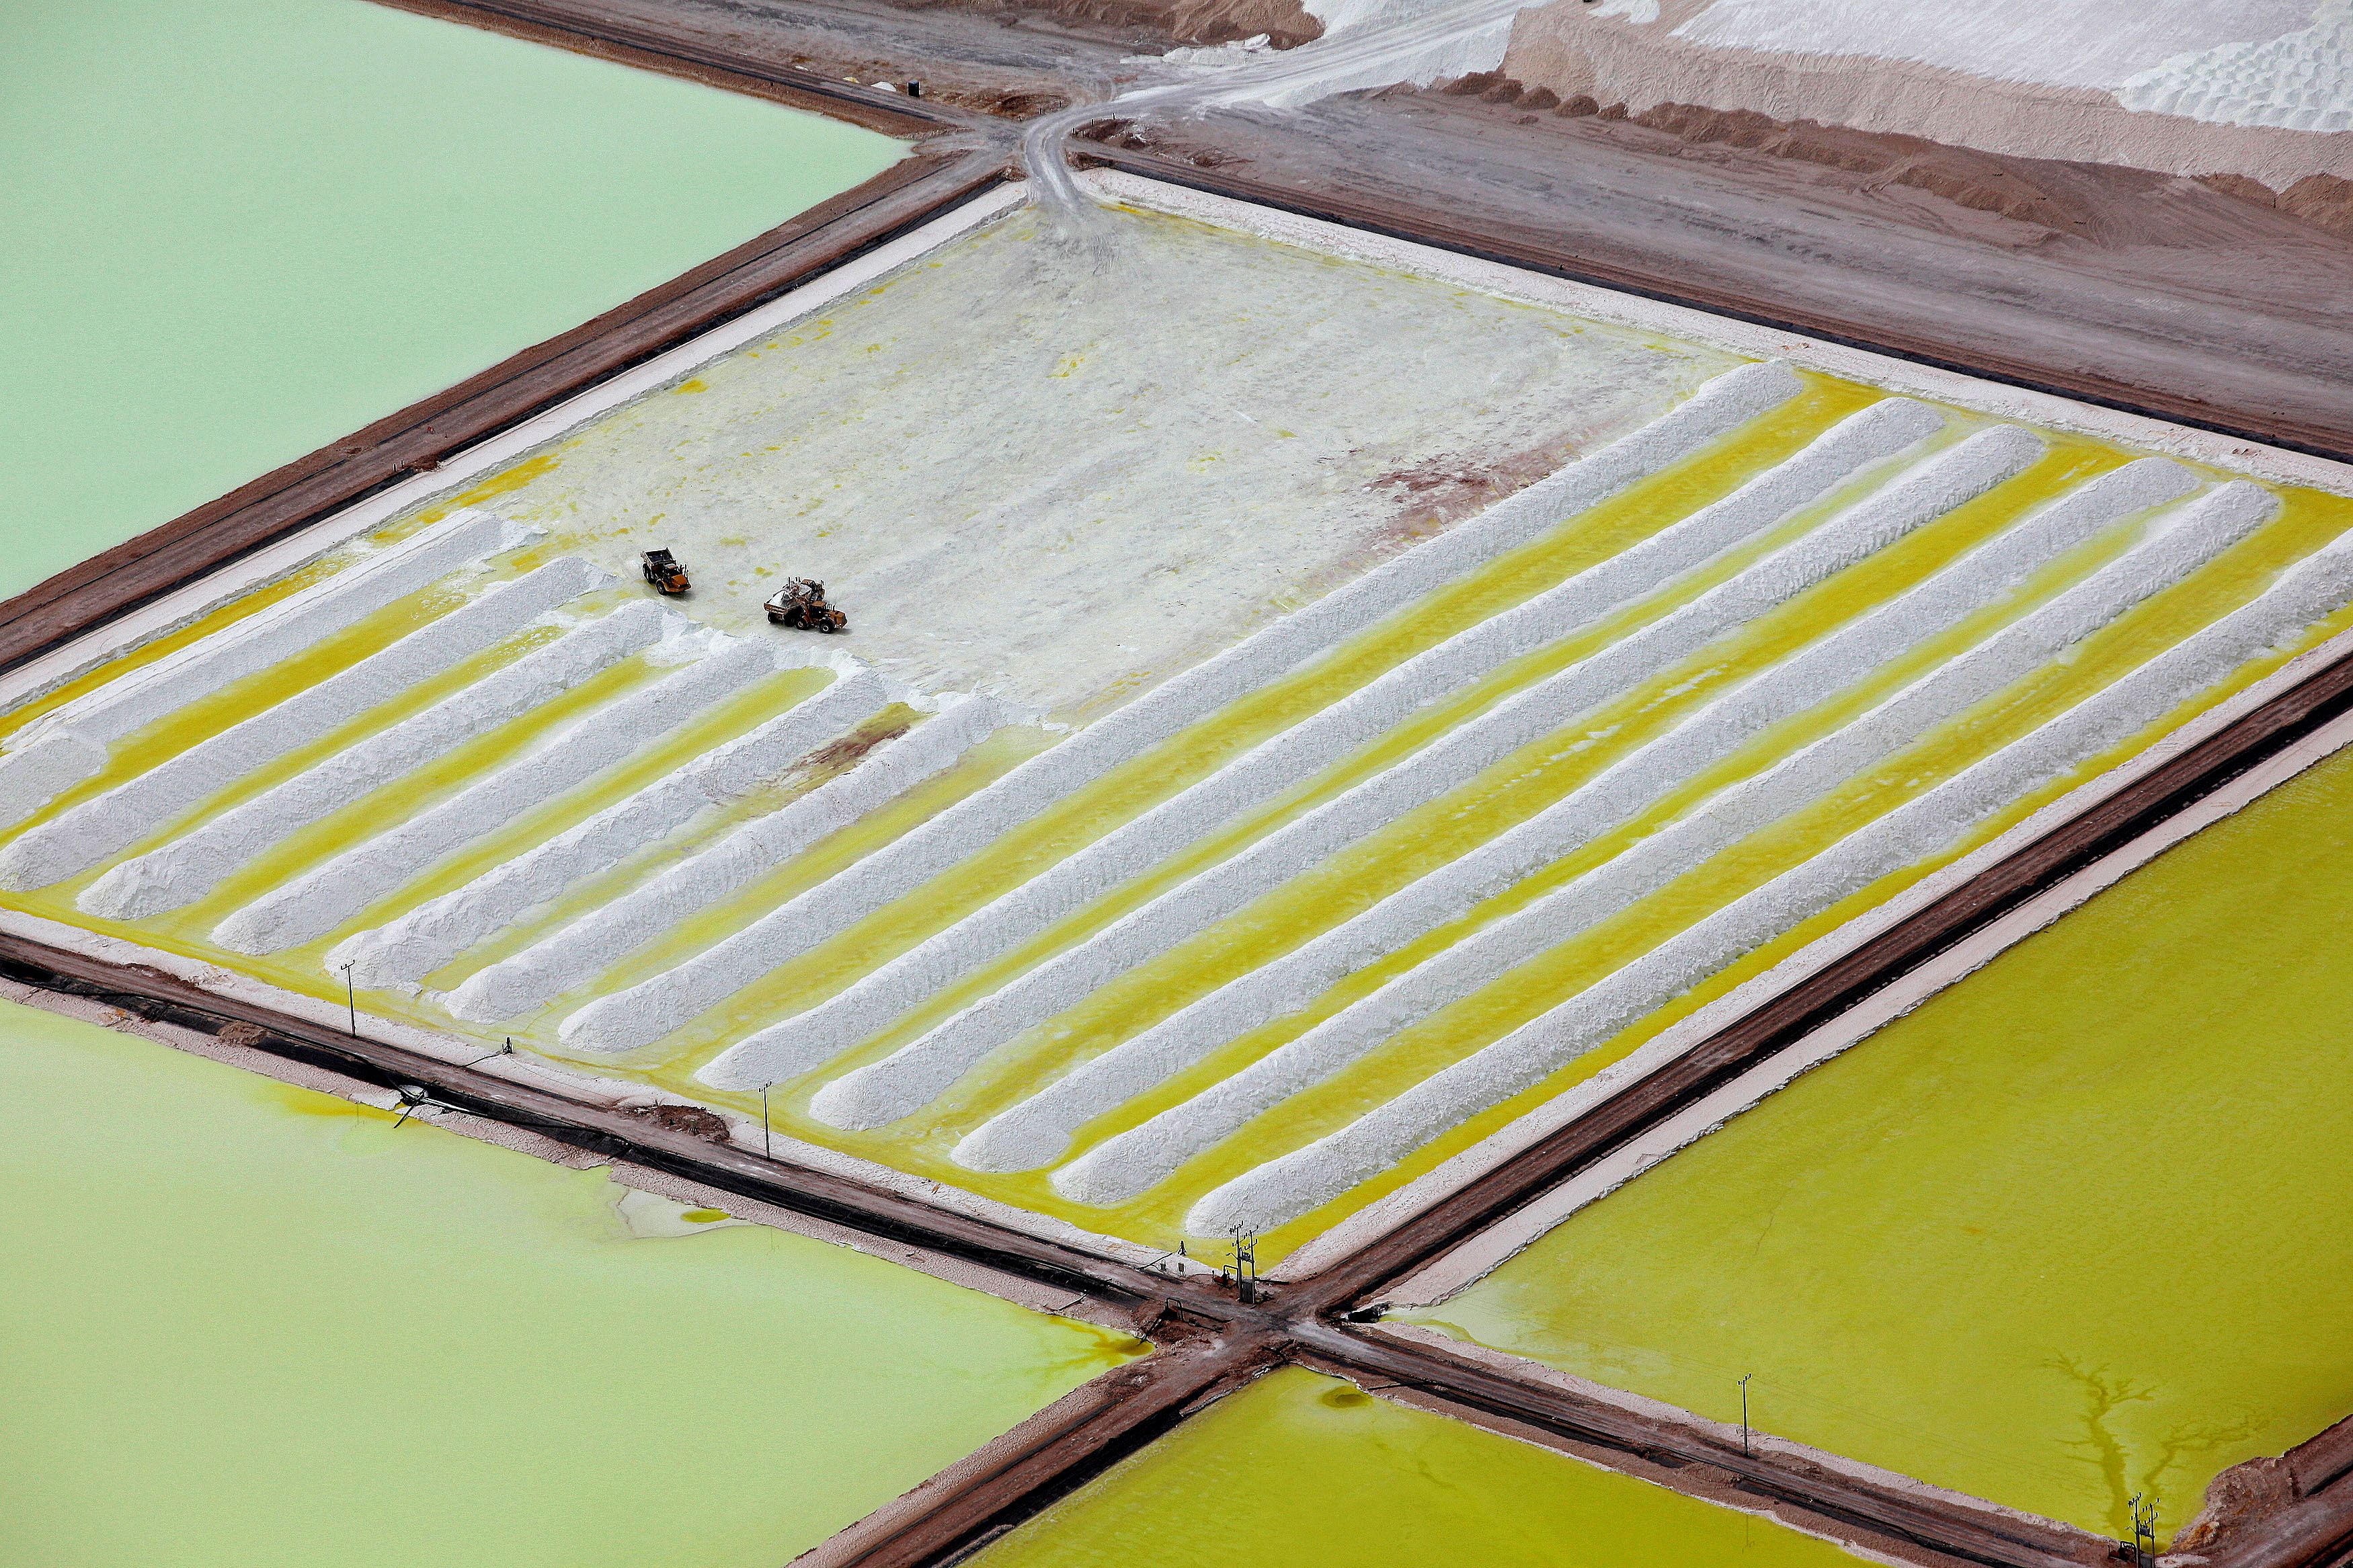 An aerial view of the Soquimich lithium mine on the Atacama salt flat in northern Chile